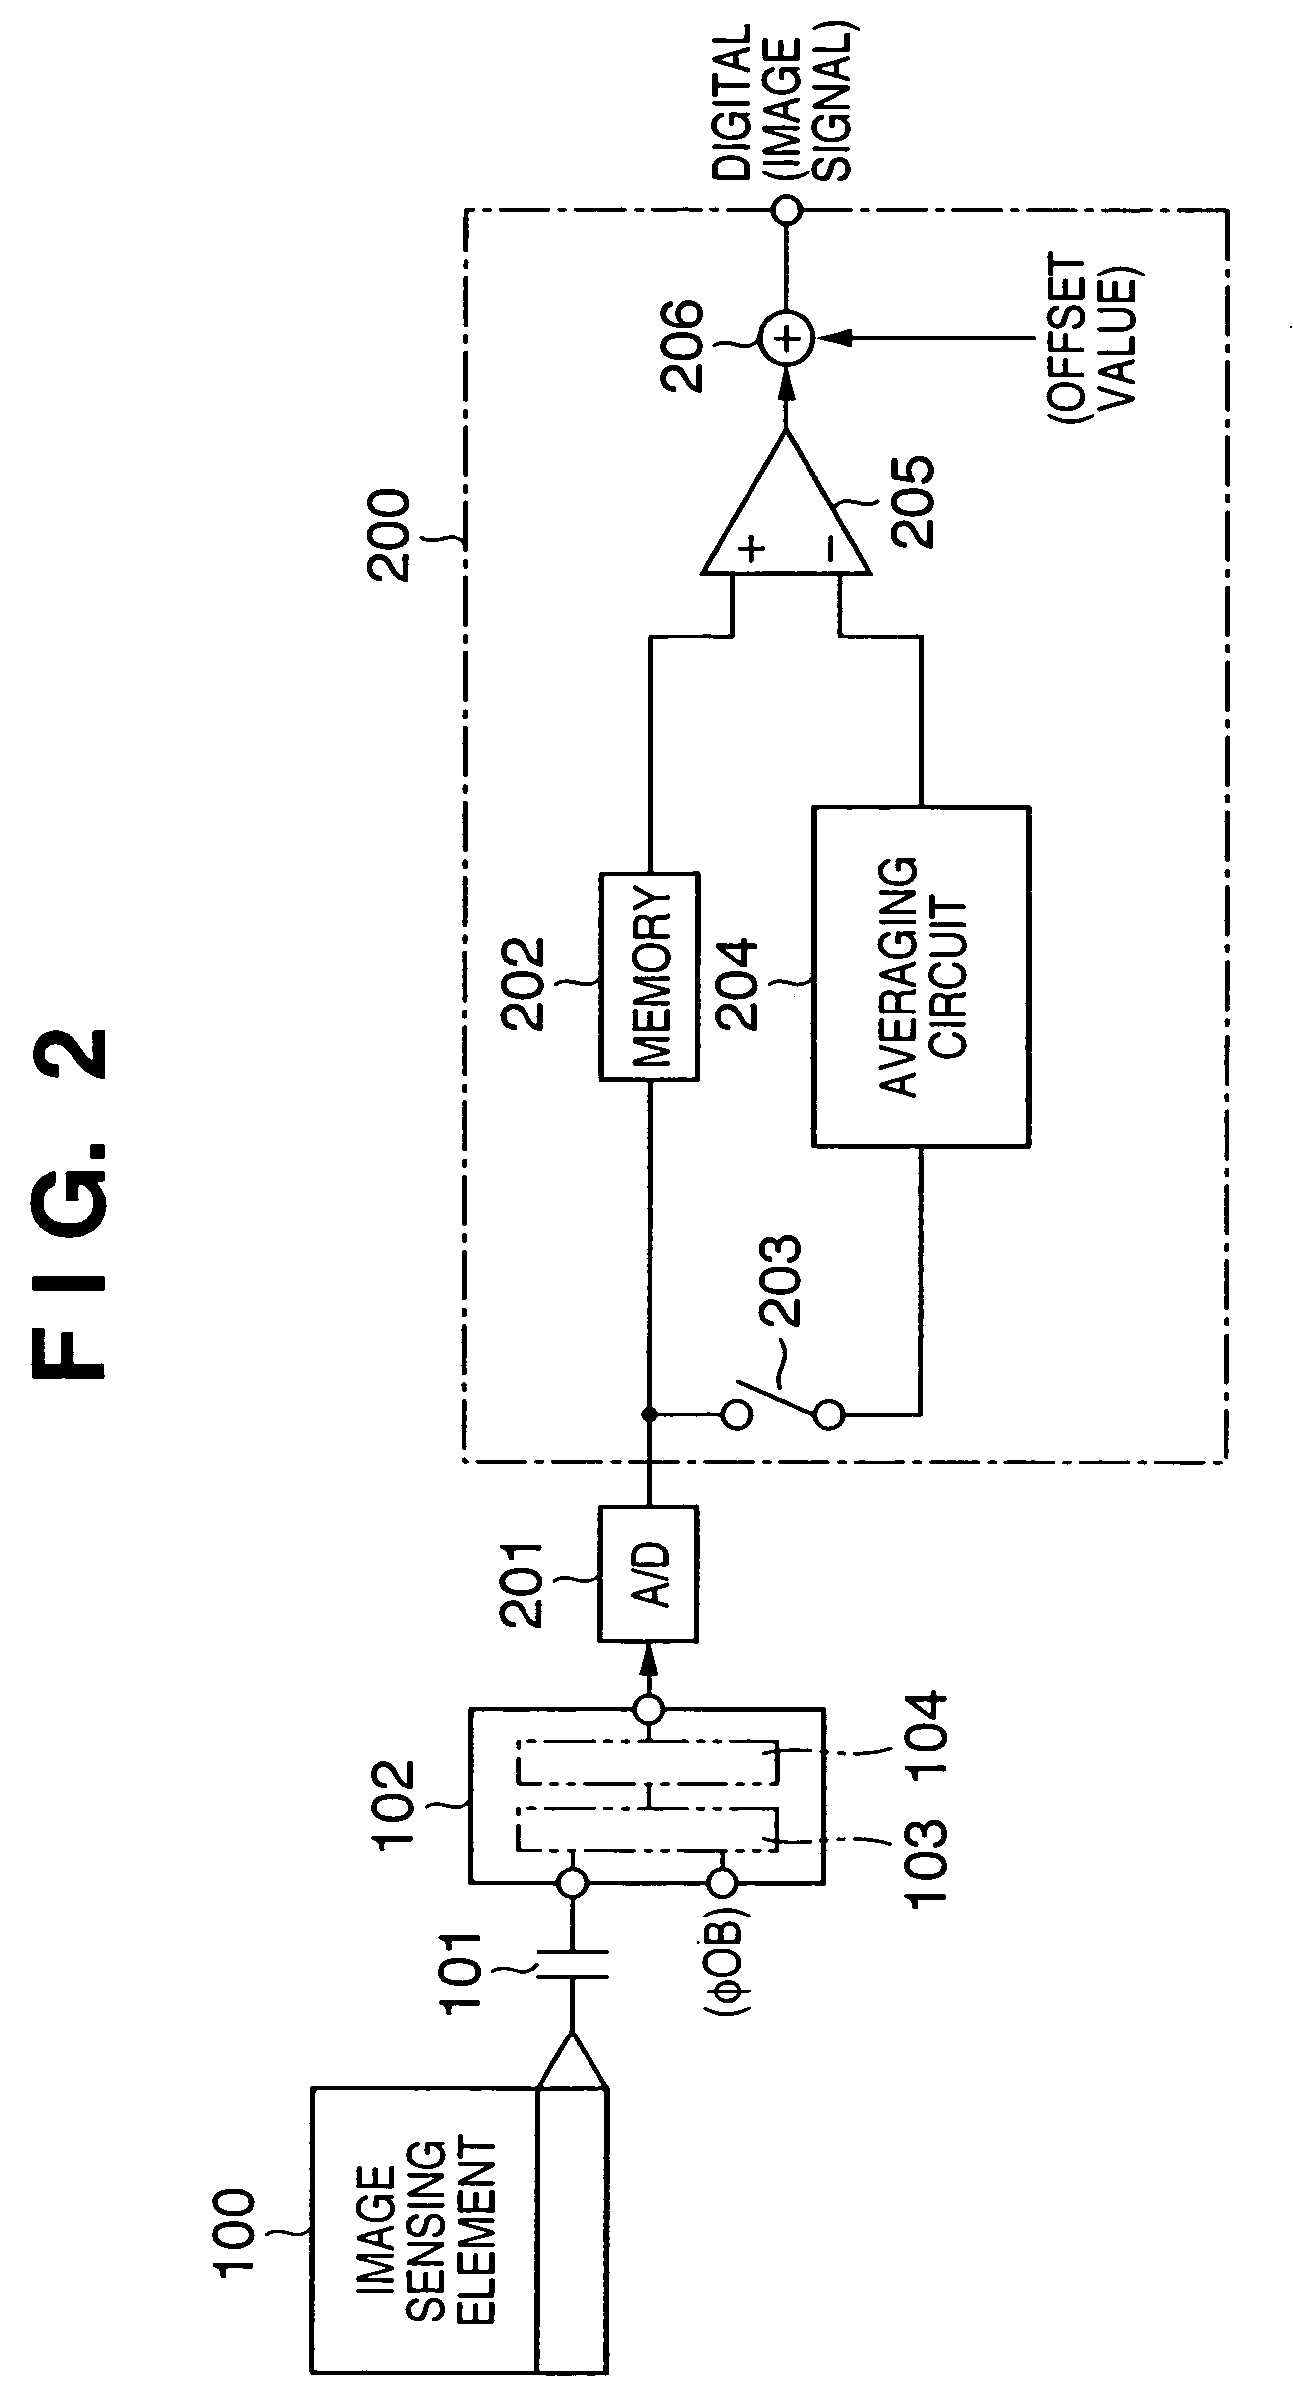 Image sensing apparatus and method for accurate dark current recovery of an image signal